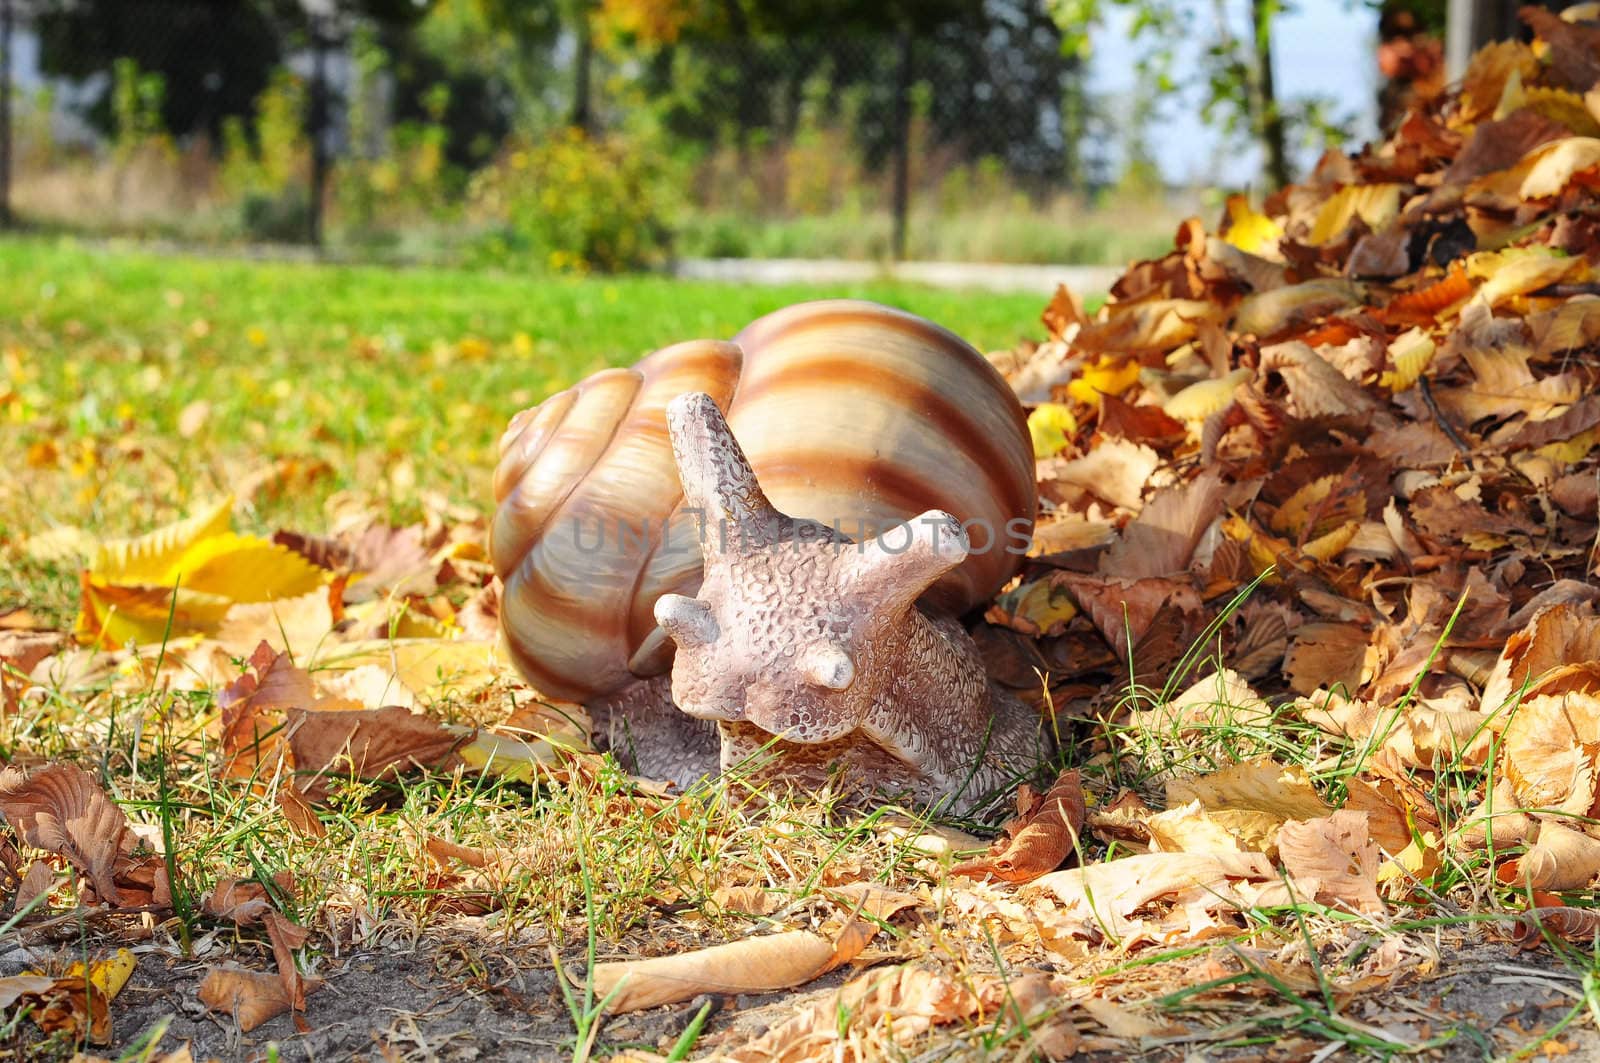 Snail in the grass by elevation